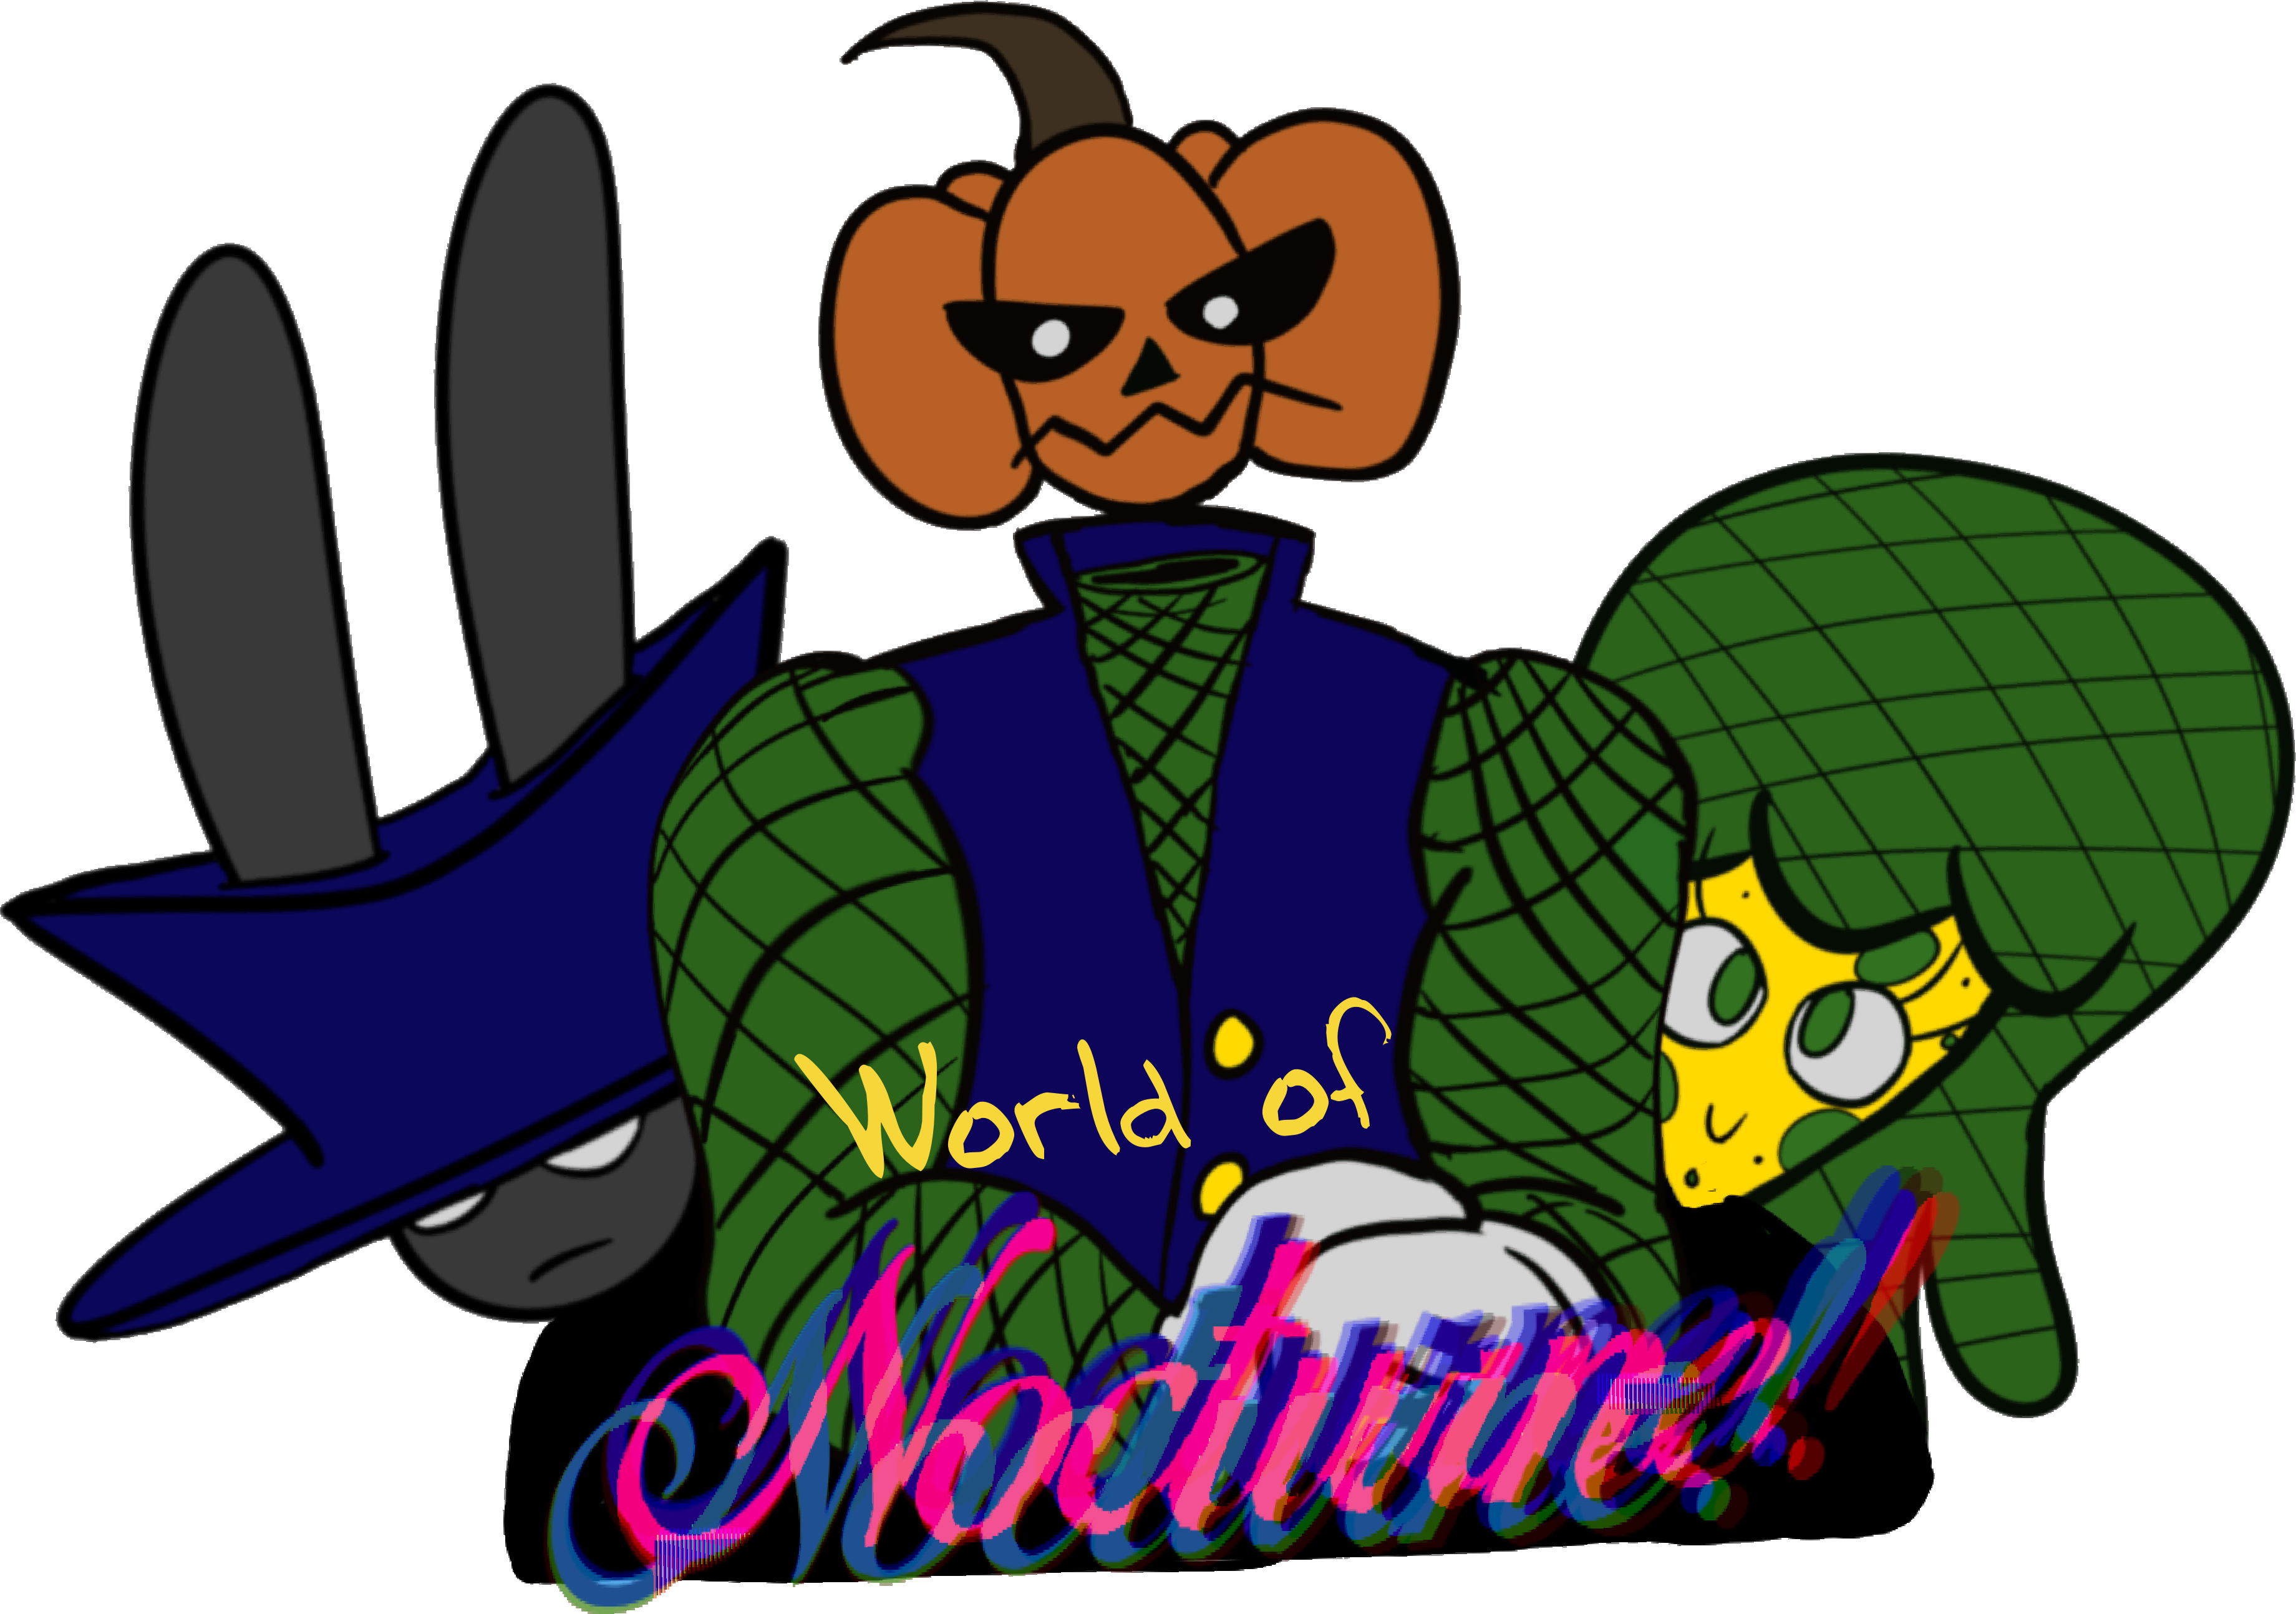 world of nocturne